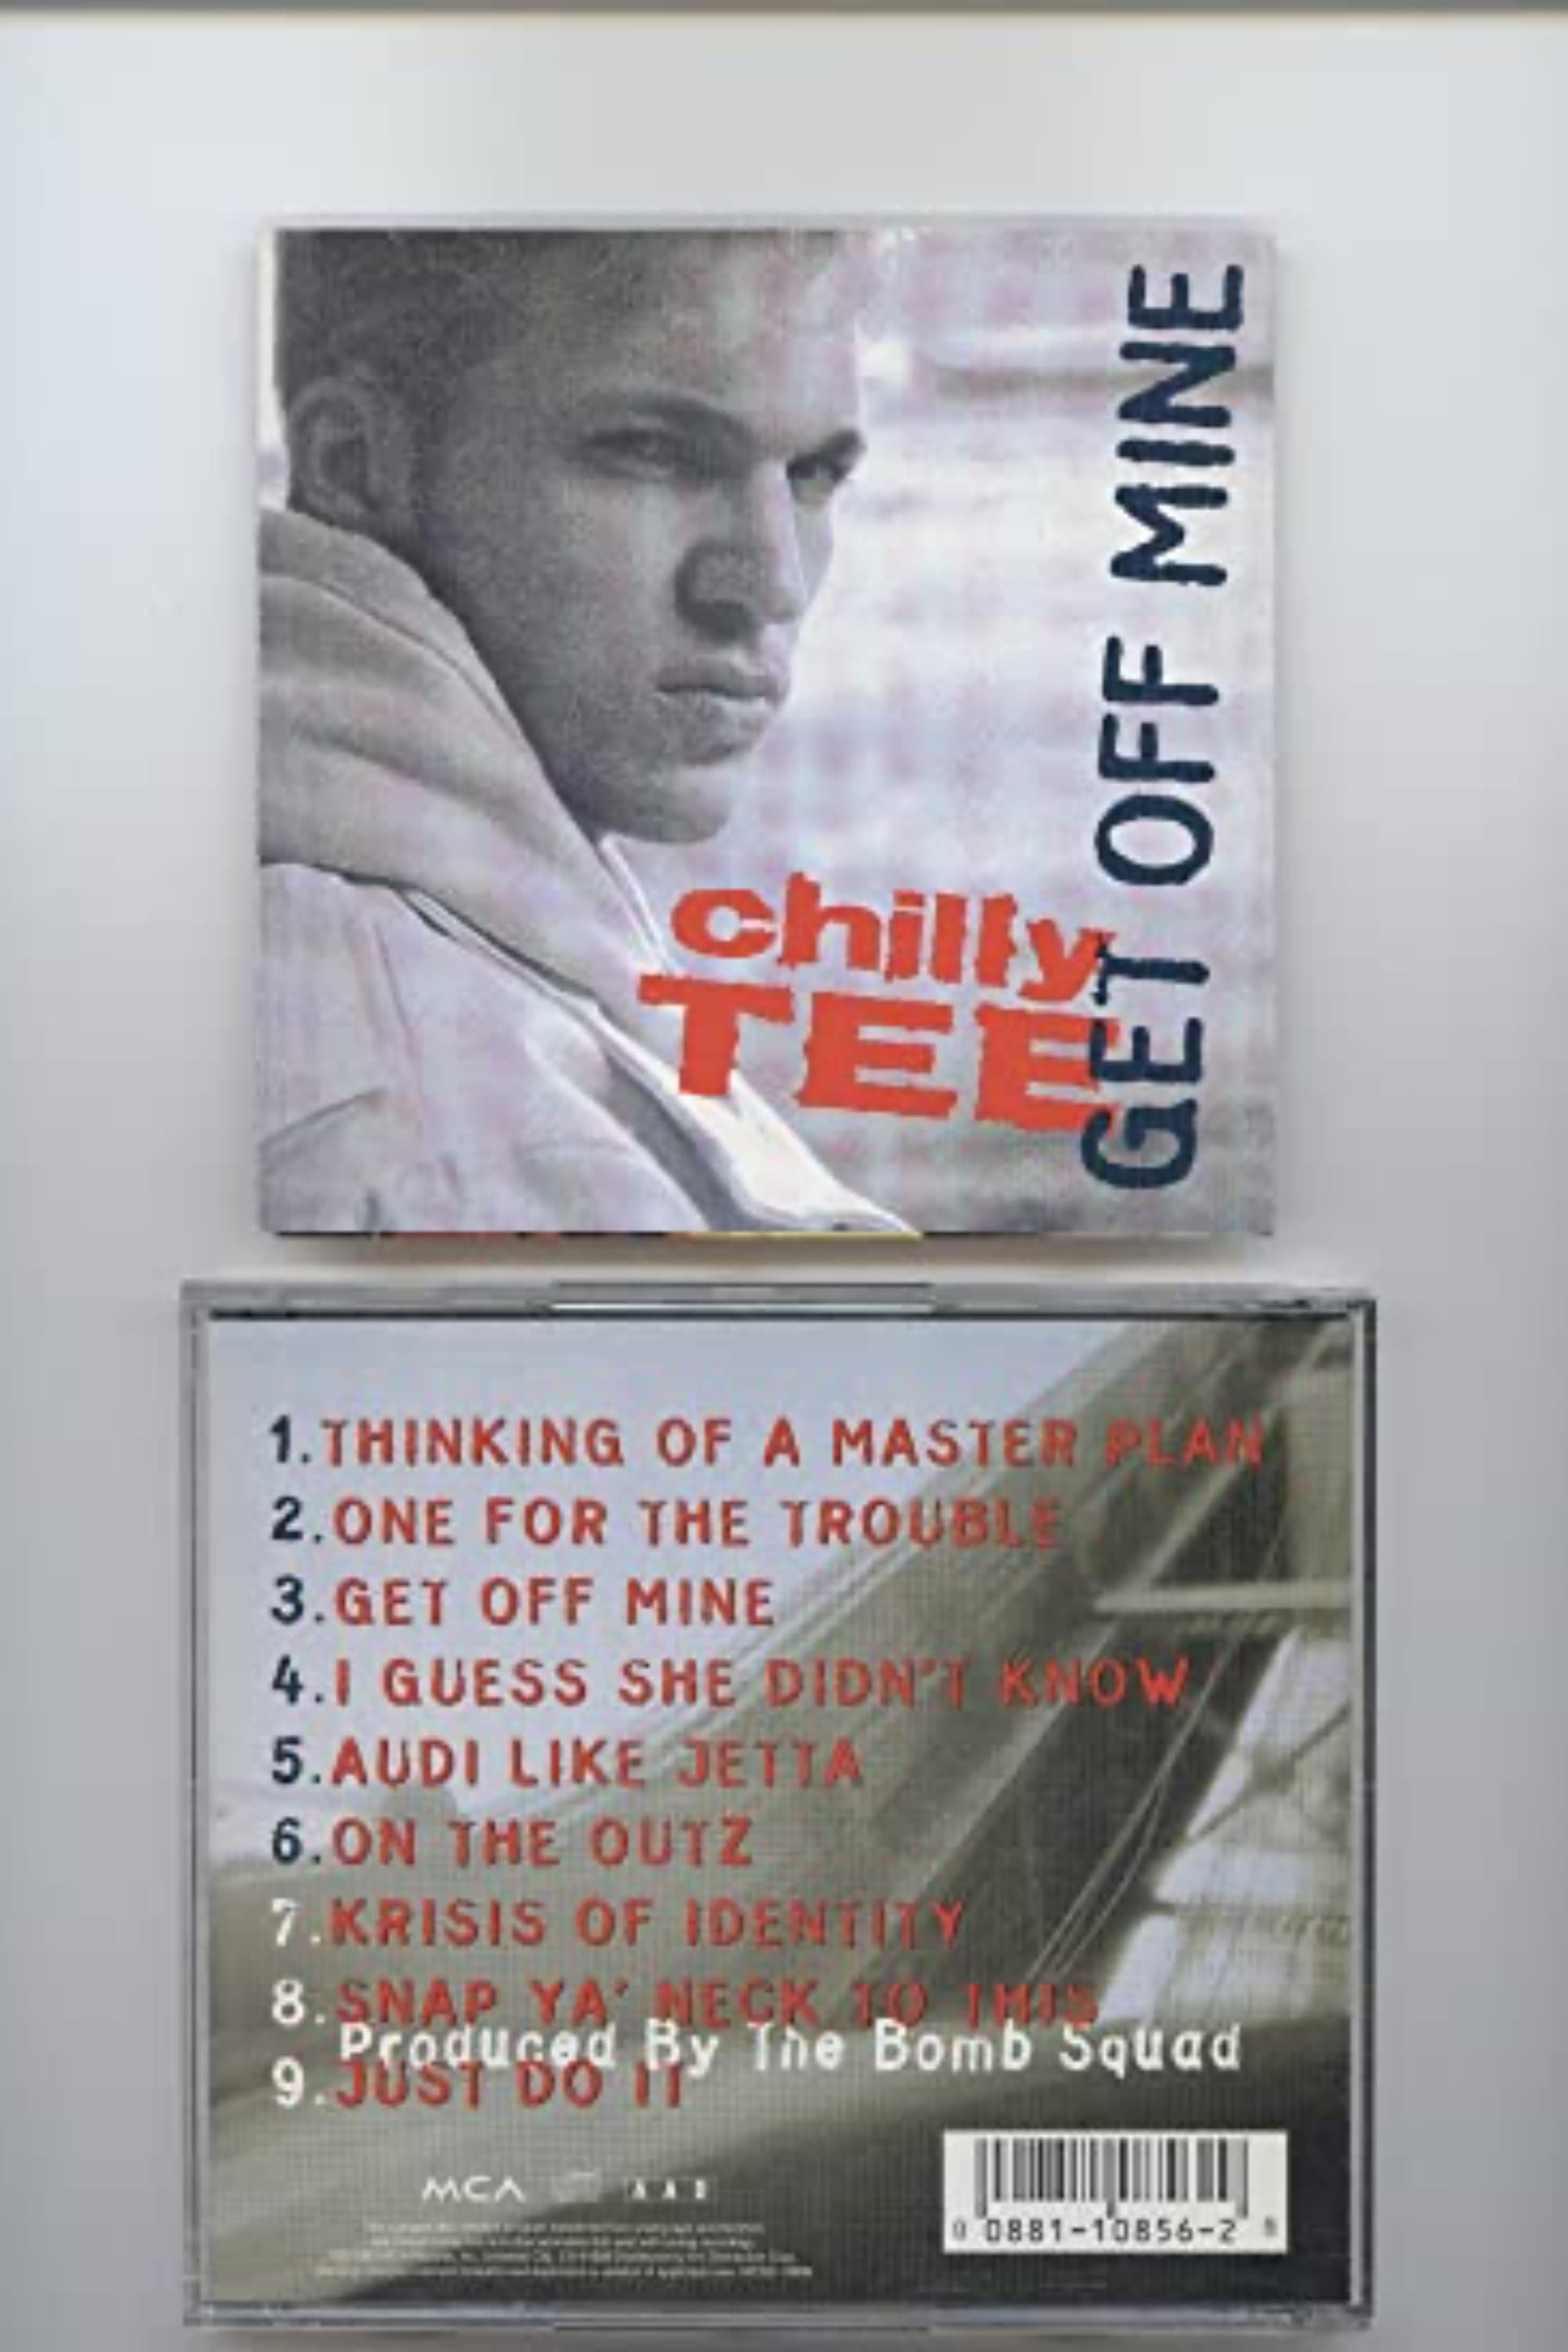 Chilly Tee - "Get Off Mine"